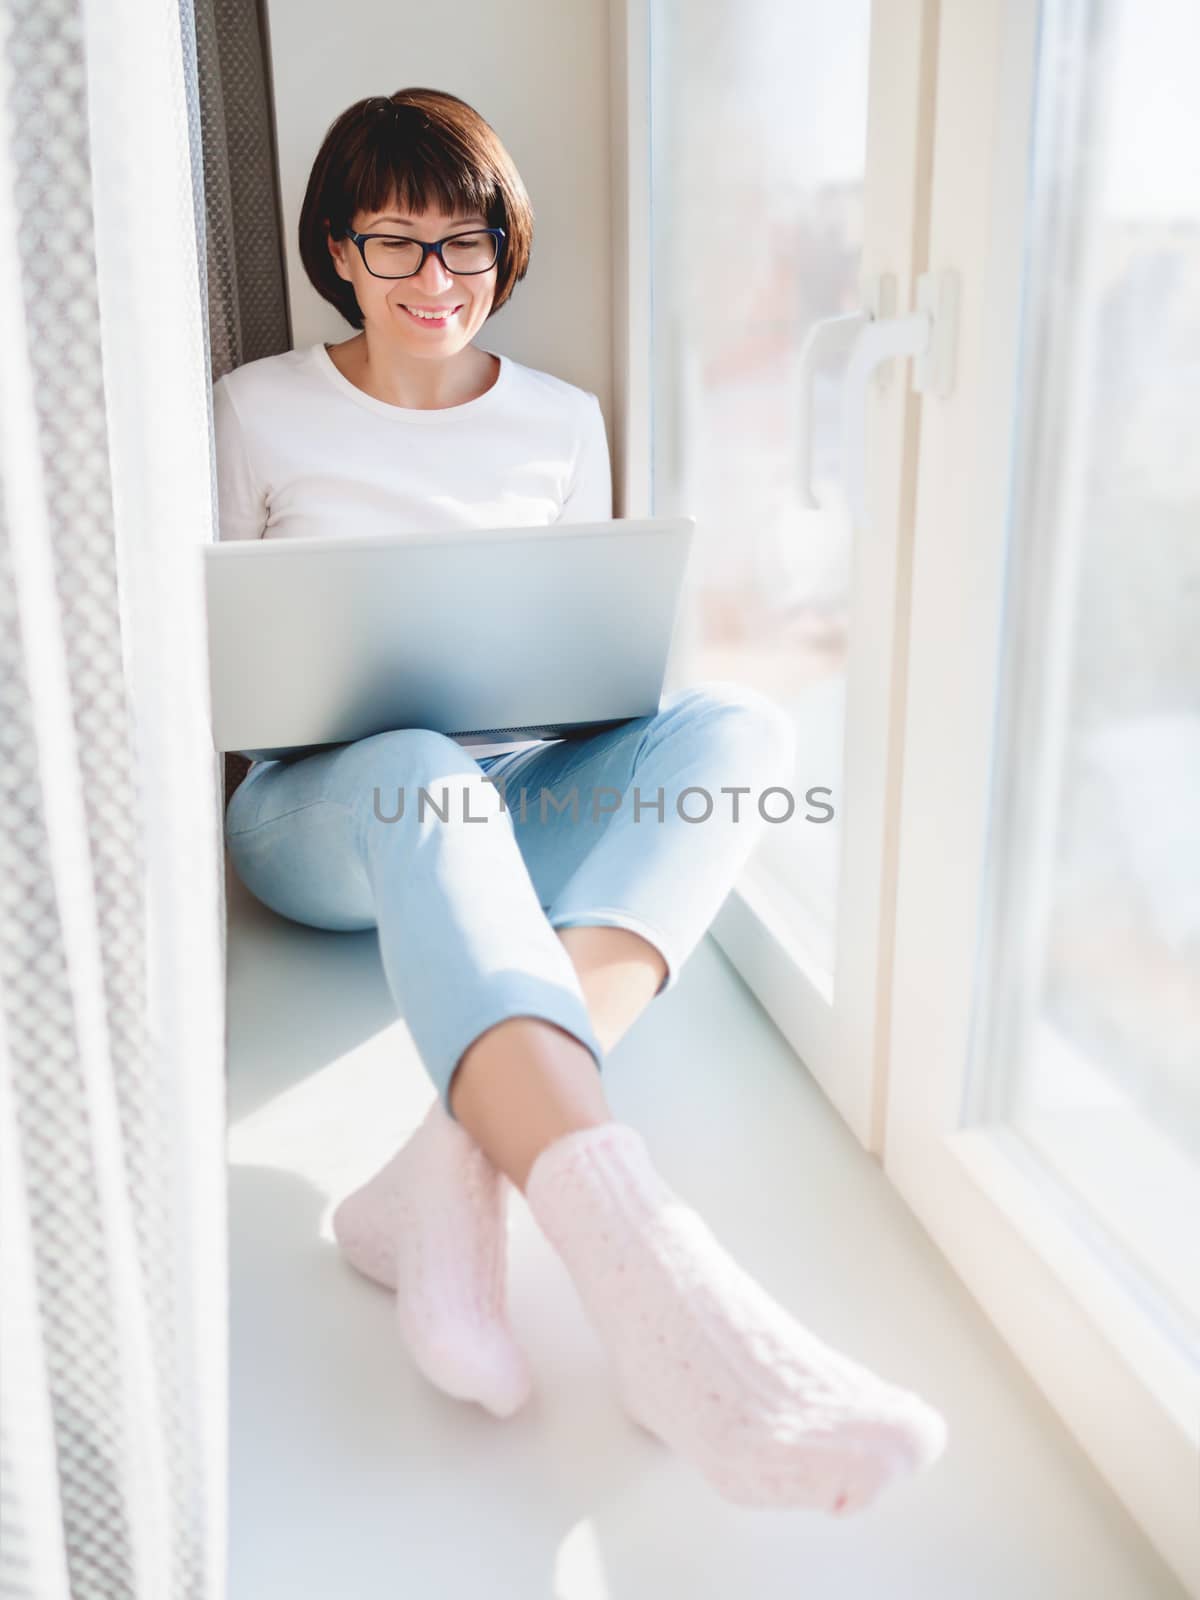 Smiling woman works remotely from home. She sits on window sill with laptop on knees. Lockdown quarantine because of coronavirus COVID19. Self isolation at home.